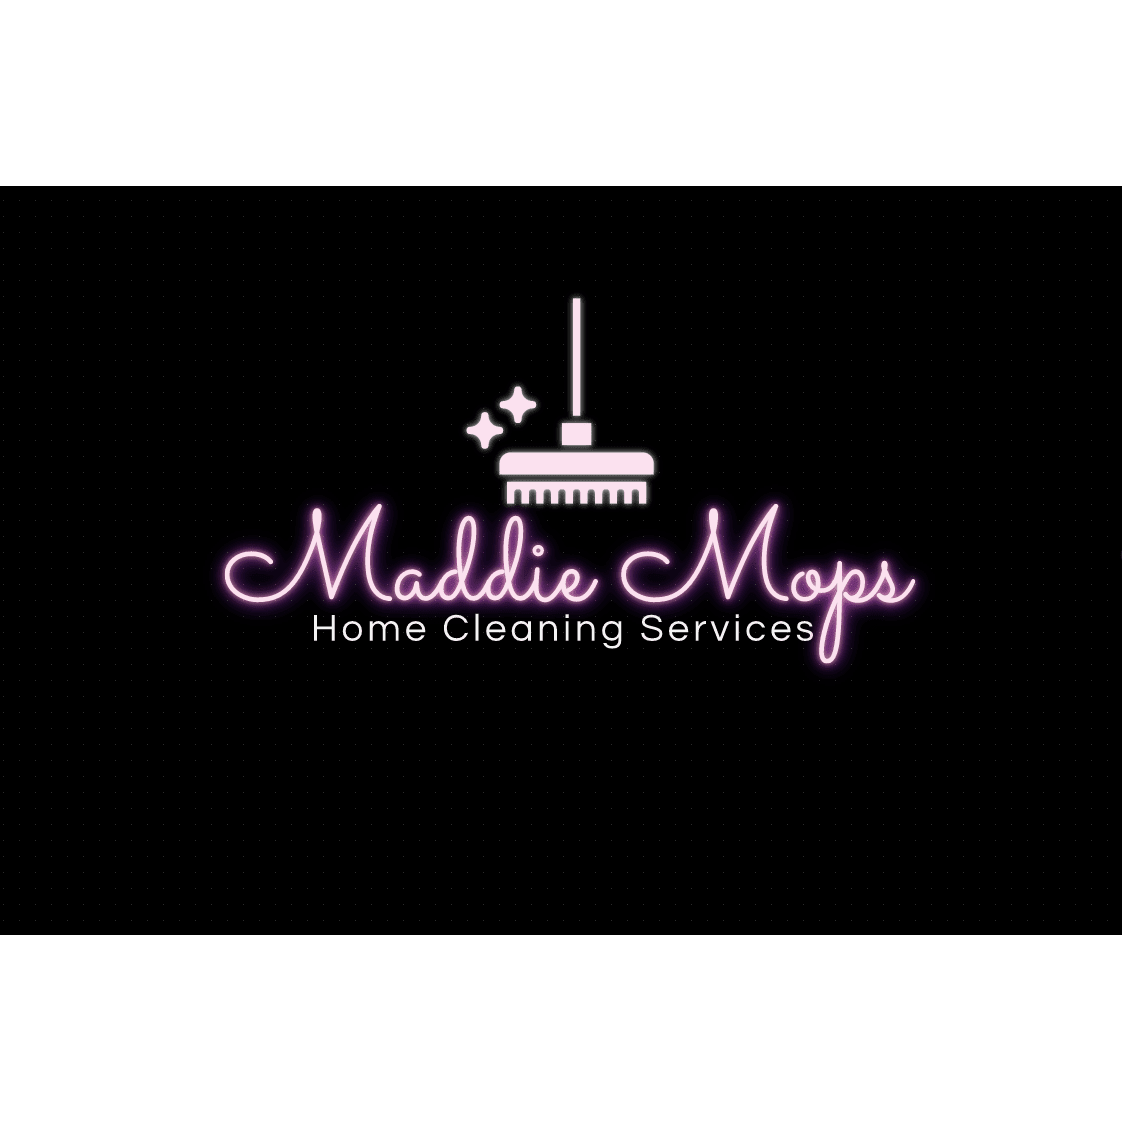 Maddie Mops Home Cleaning Services Logo